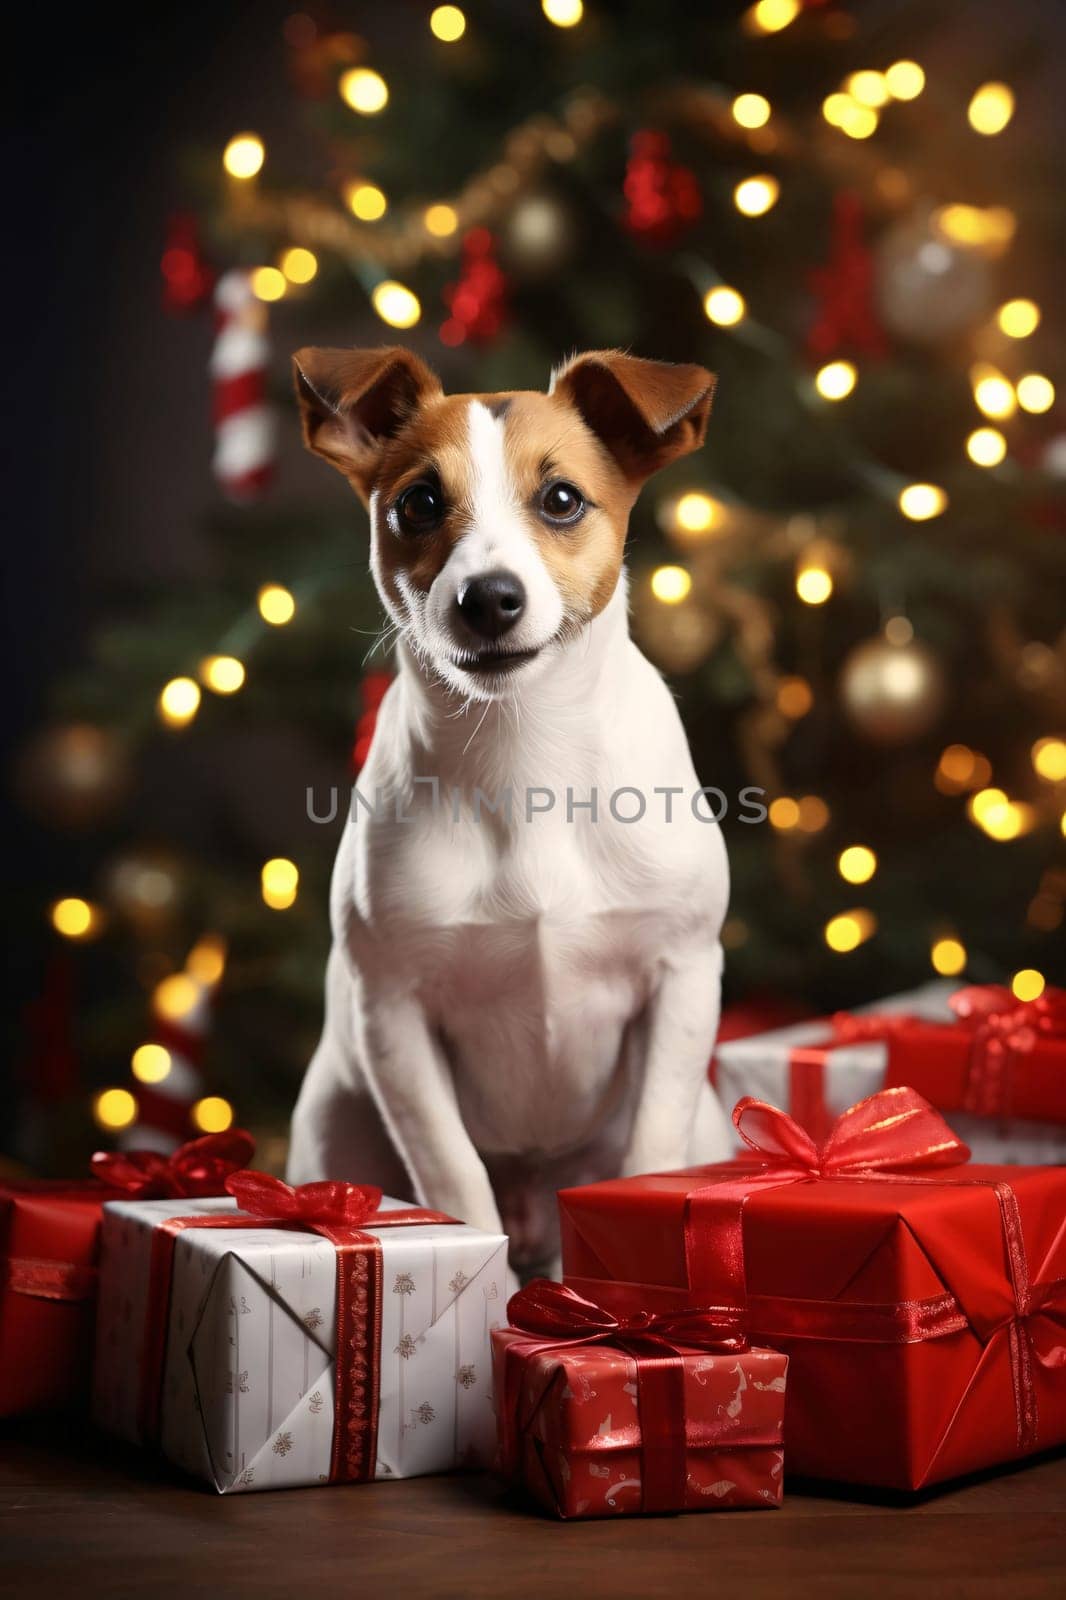 Dog, around red white gifts with bows in the background Christmas tree with lights.Valentine's Day banner with space for your own content. by ThemesS